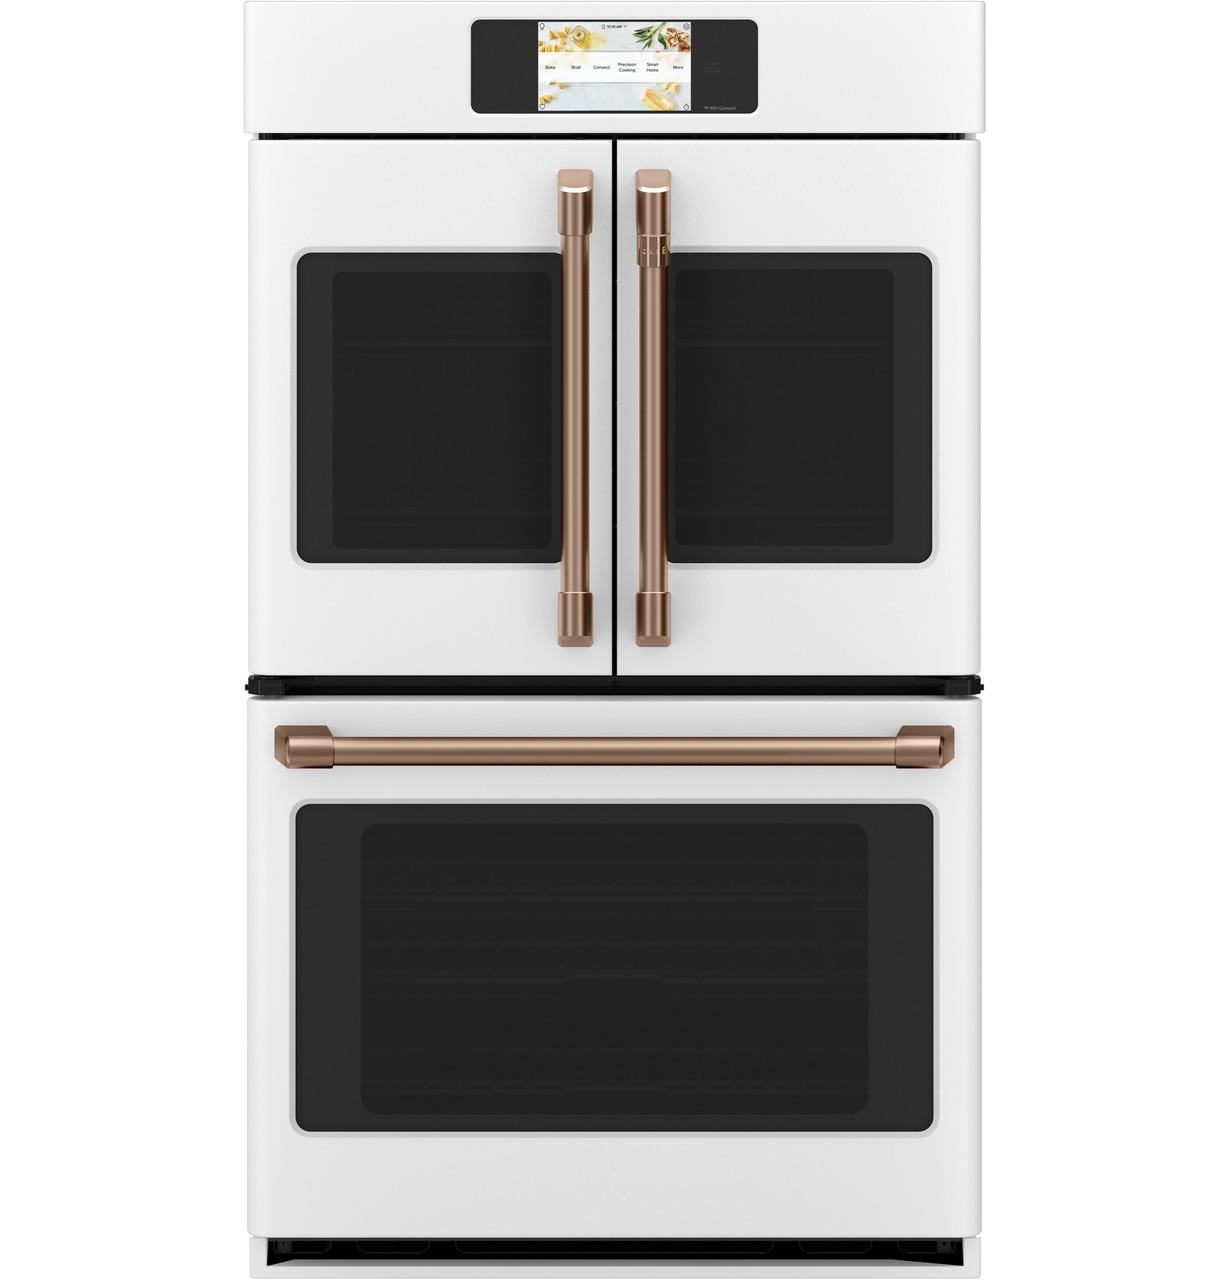 Cafe Caf(eback)™ Professional Series 30" Smart Built-In Convection French-Door Double Wall Oven